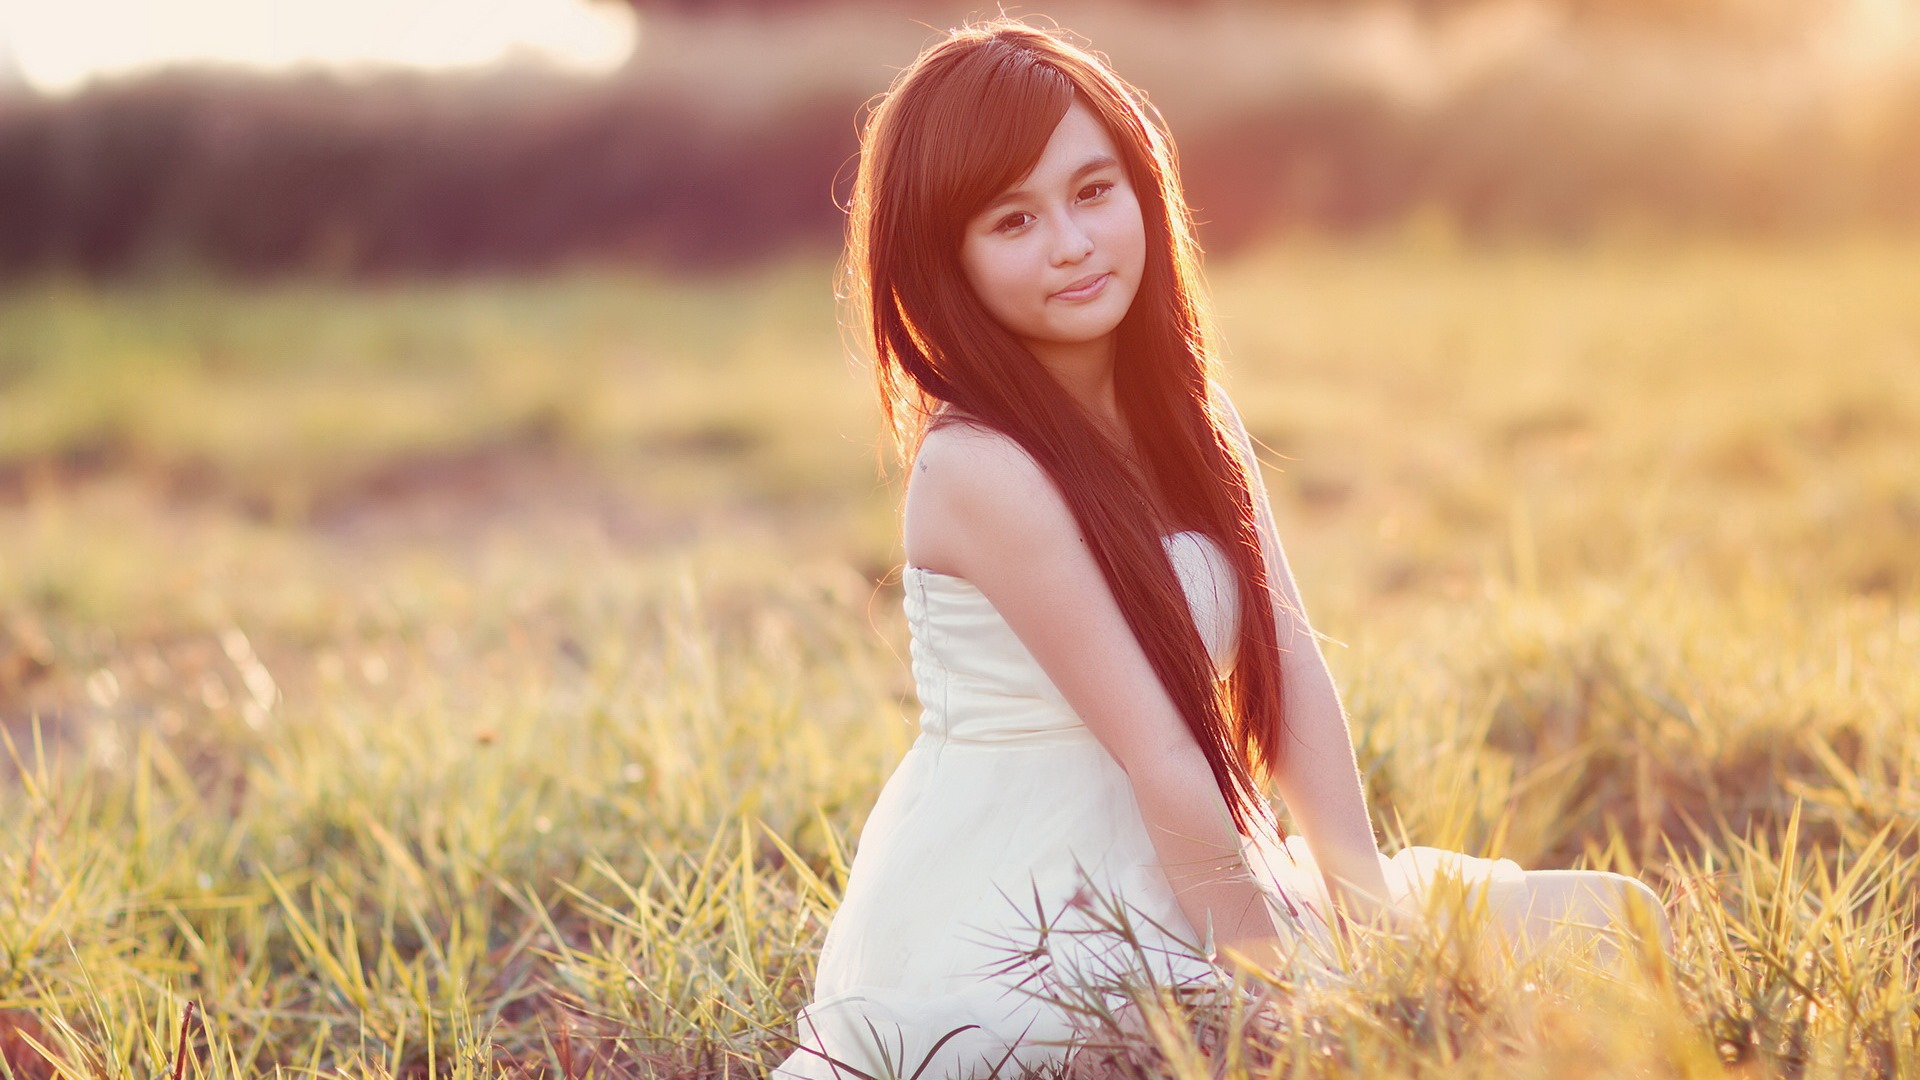 Pure and lovely young Asian girl HD wallpapers collection (5) #29 - 1920x1080